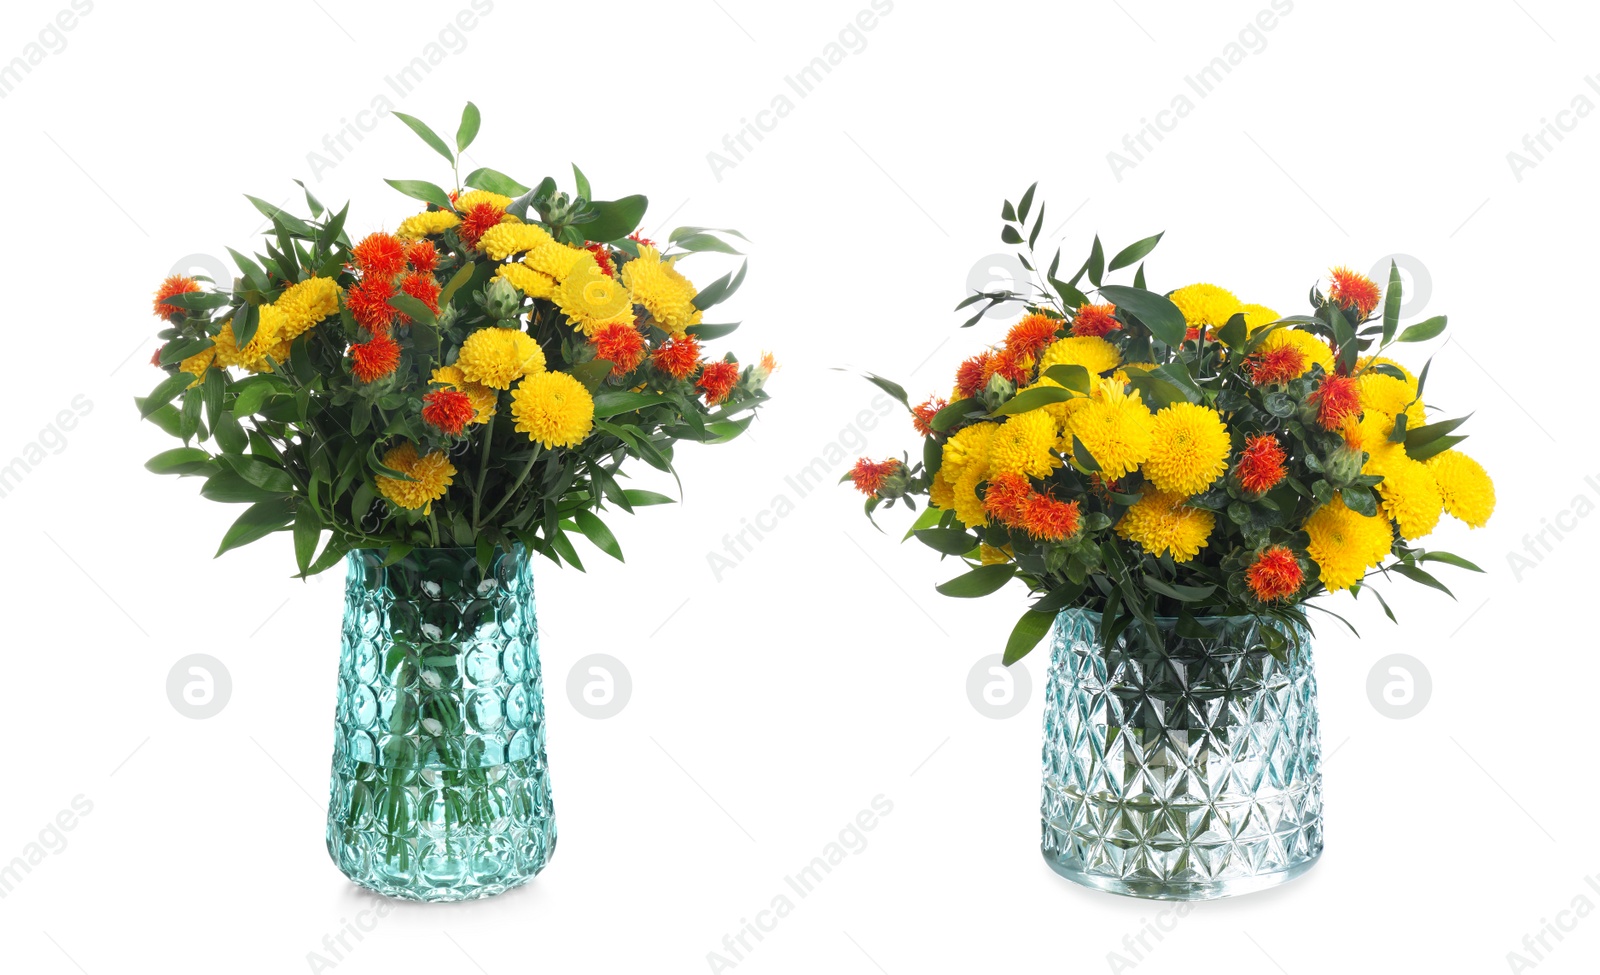 Image of Bouquets with beautiful bright aster flowers in glass vases on white background